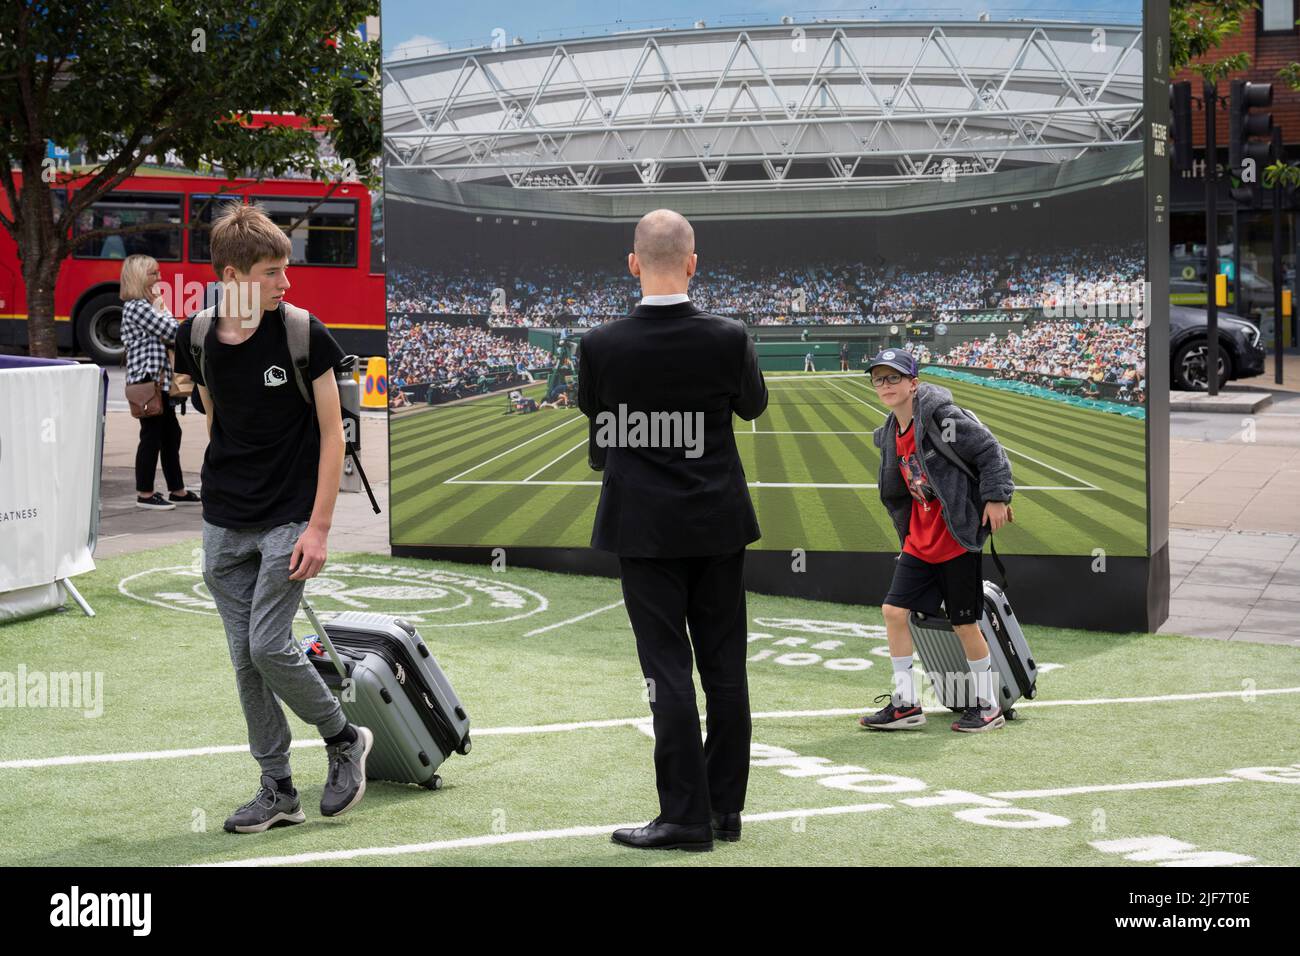 An image of the Lawn Tennis Association's Centre Court is located in front of Wimbledon train station where the public walk past during the two-week championships, on 30th June 2022, in London, England. Stock Photo